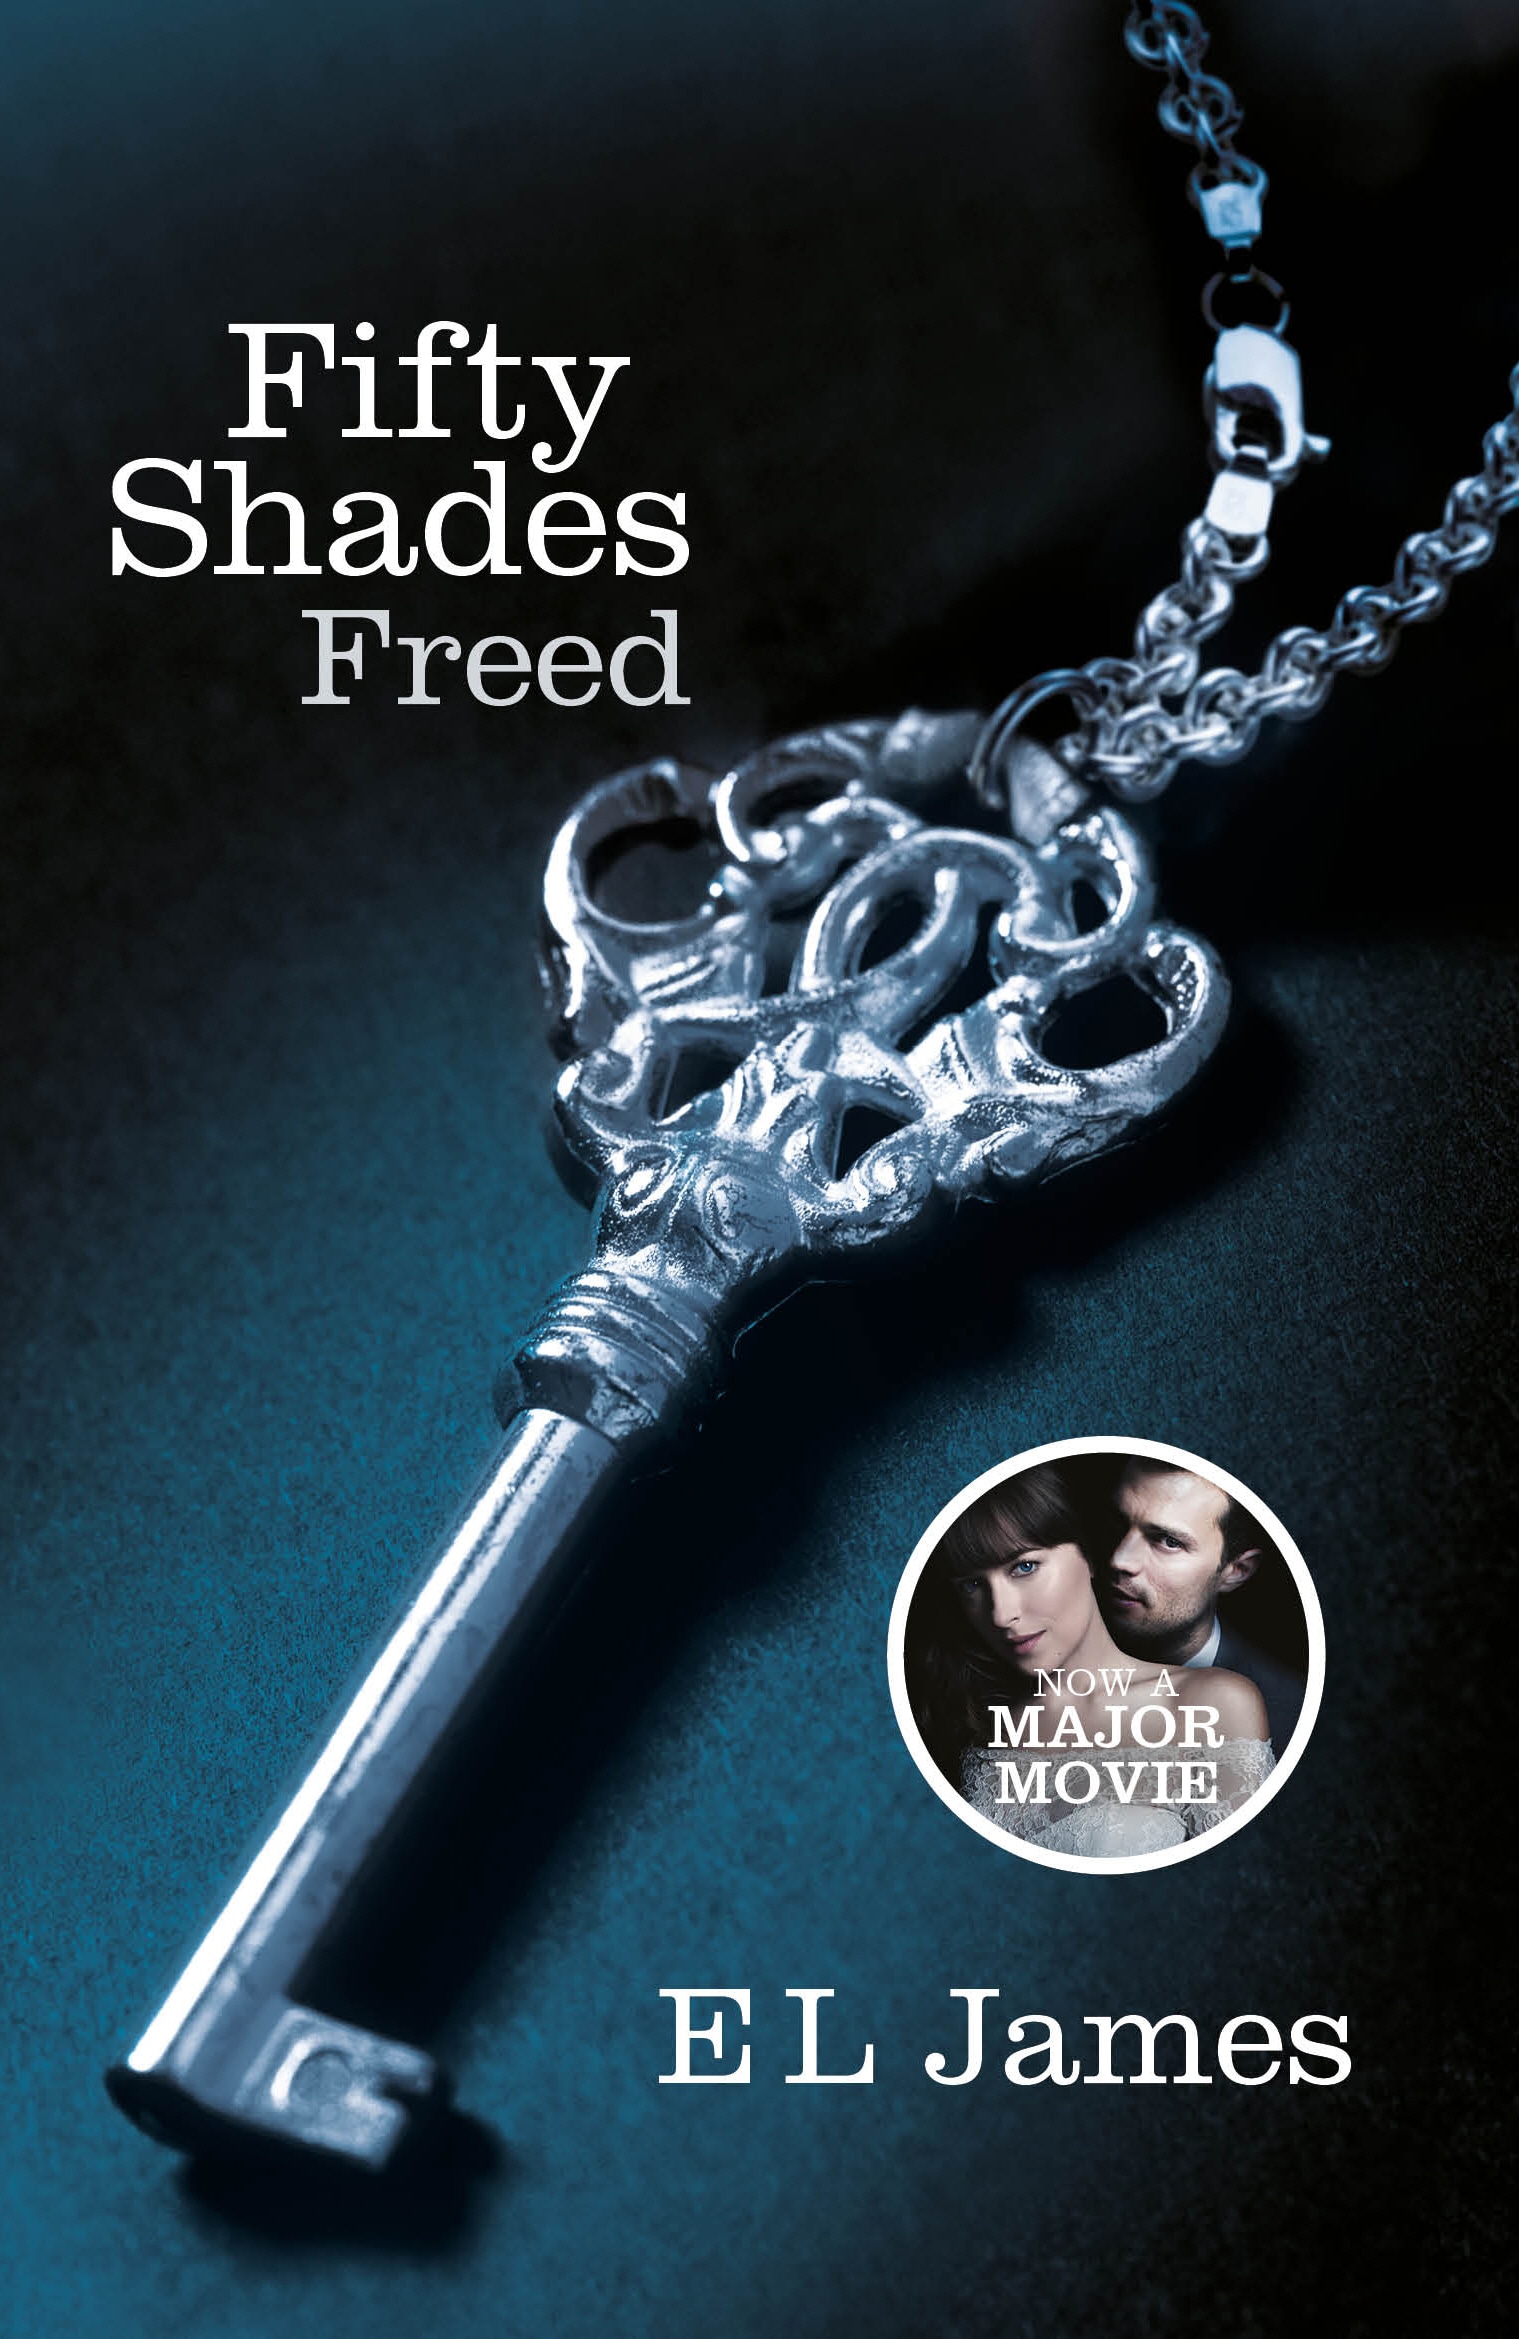 Book “Fifty Shades Freed” by E L James — April 26, 2012